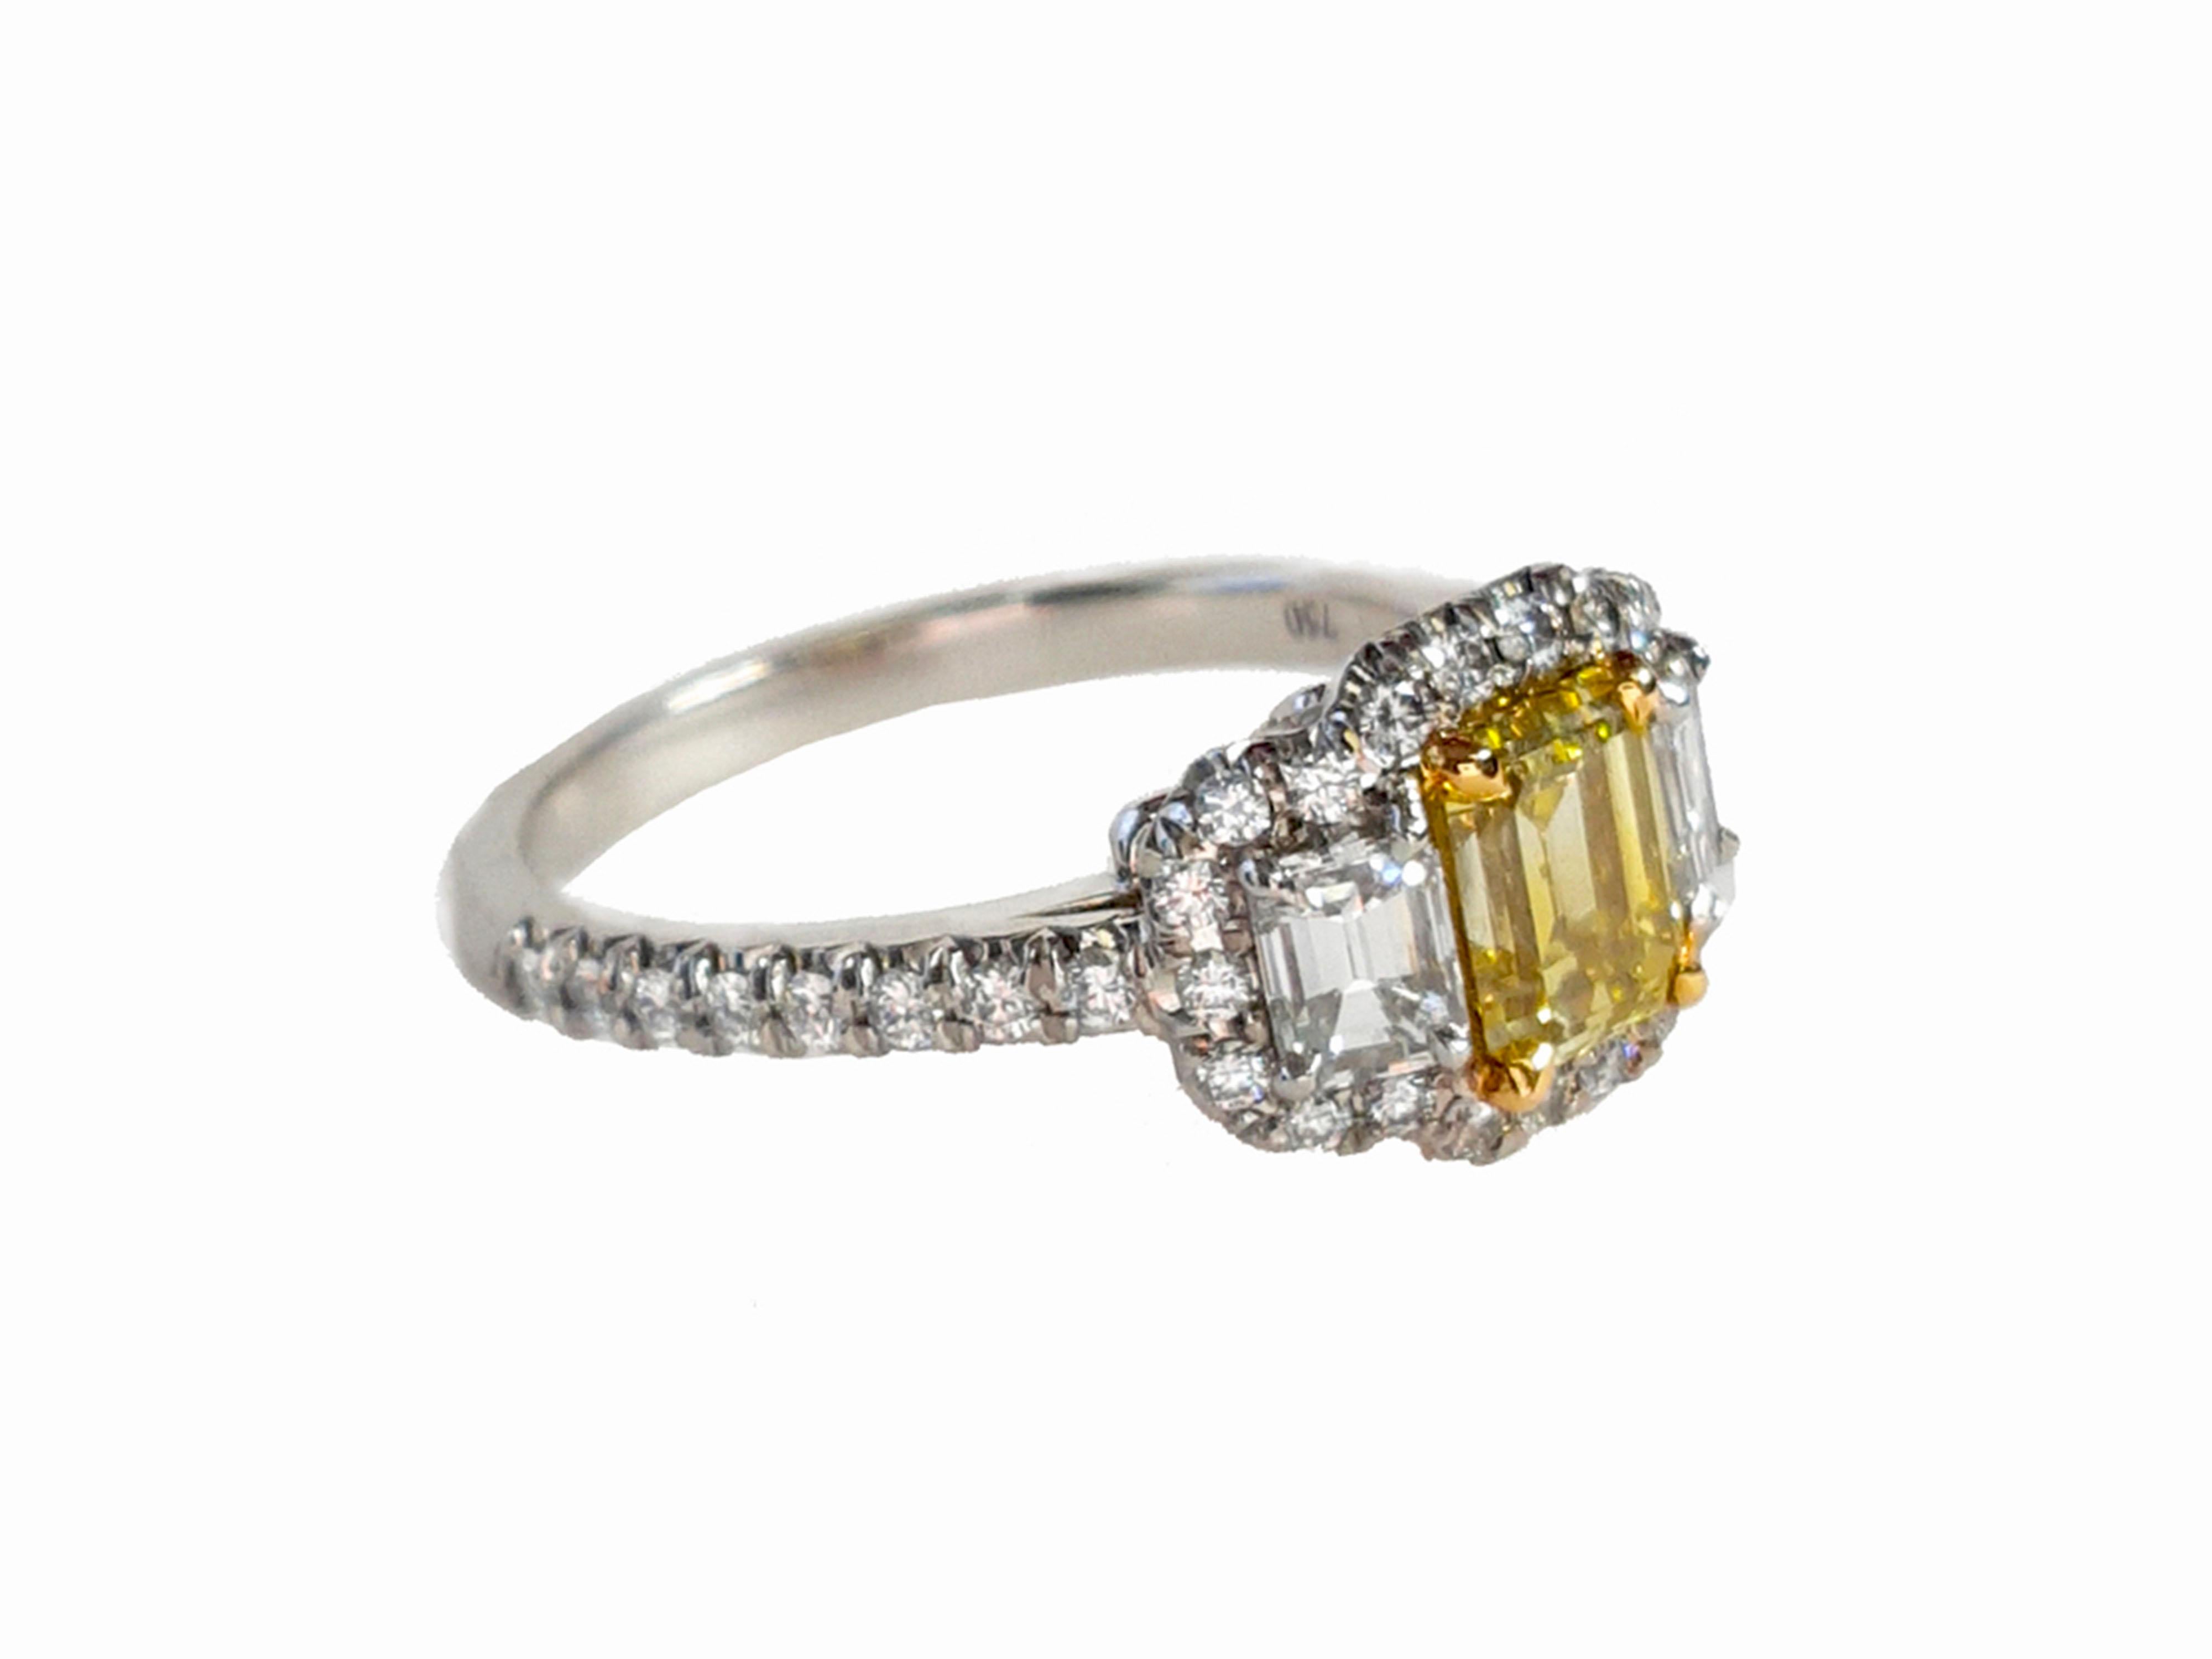 A stunning Three-Stones Engagement ring, 1.01 carat Fancy Intense Yellow Emerald cut diamond. Flanked by two Emerald-cut diamonds total weight 0.51 carat. The classic design brings out the beauty of the center stone with the surrounding 38 round